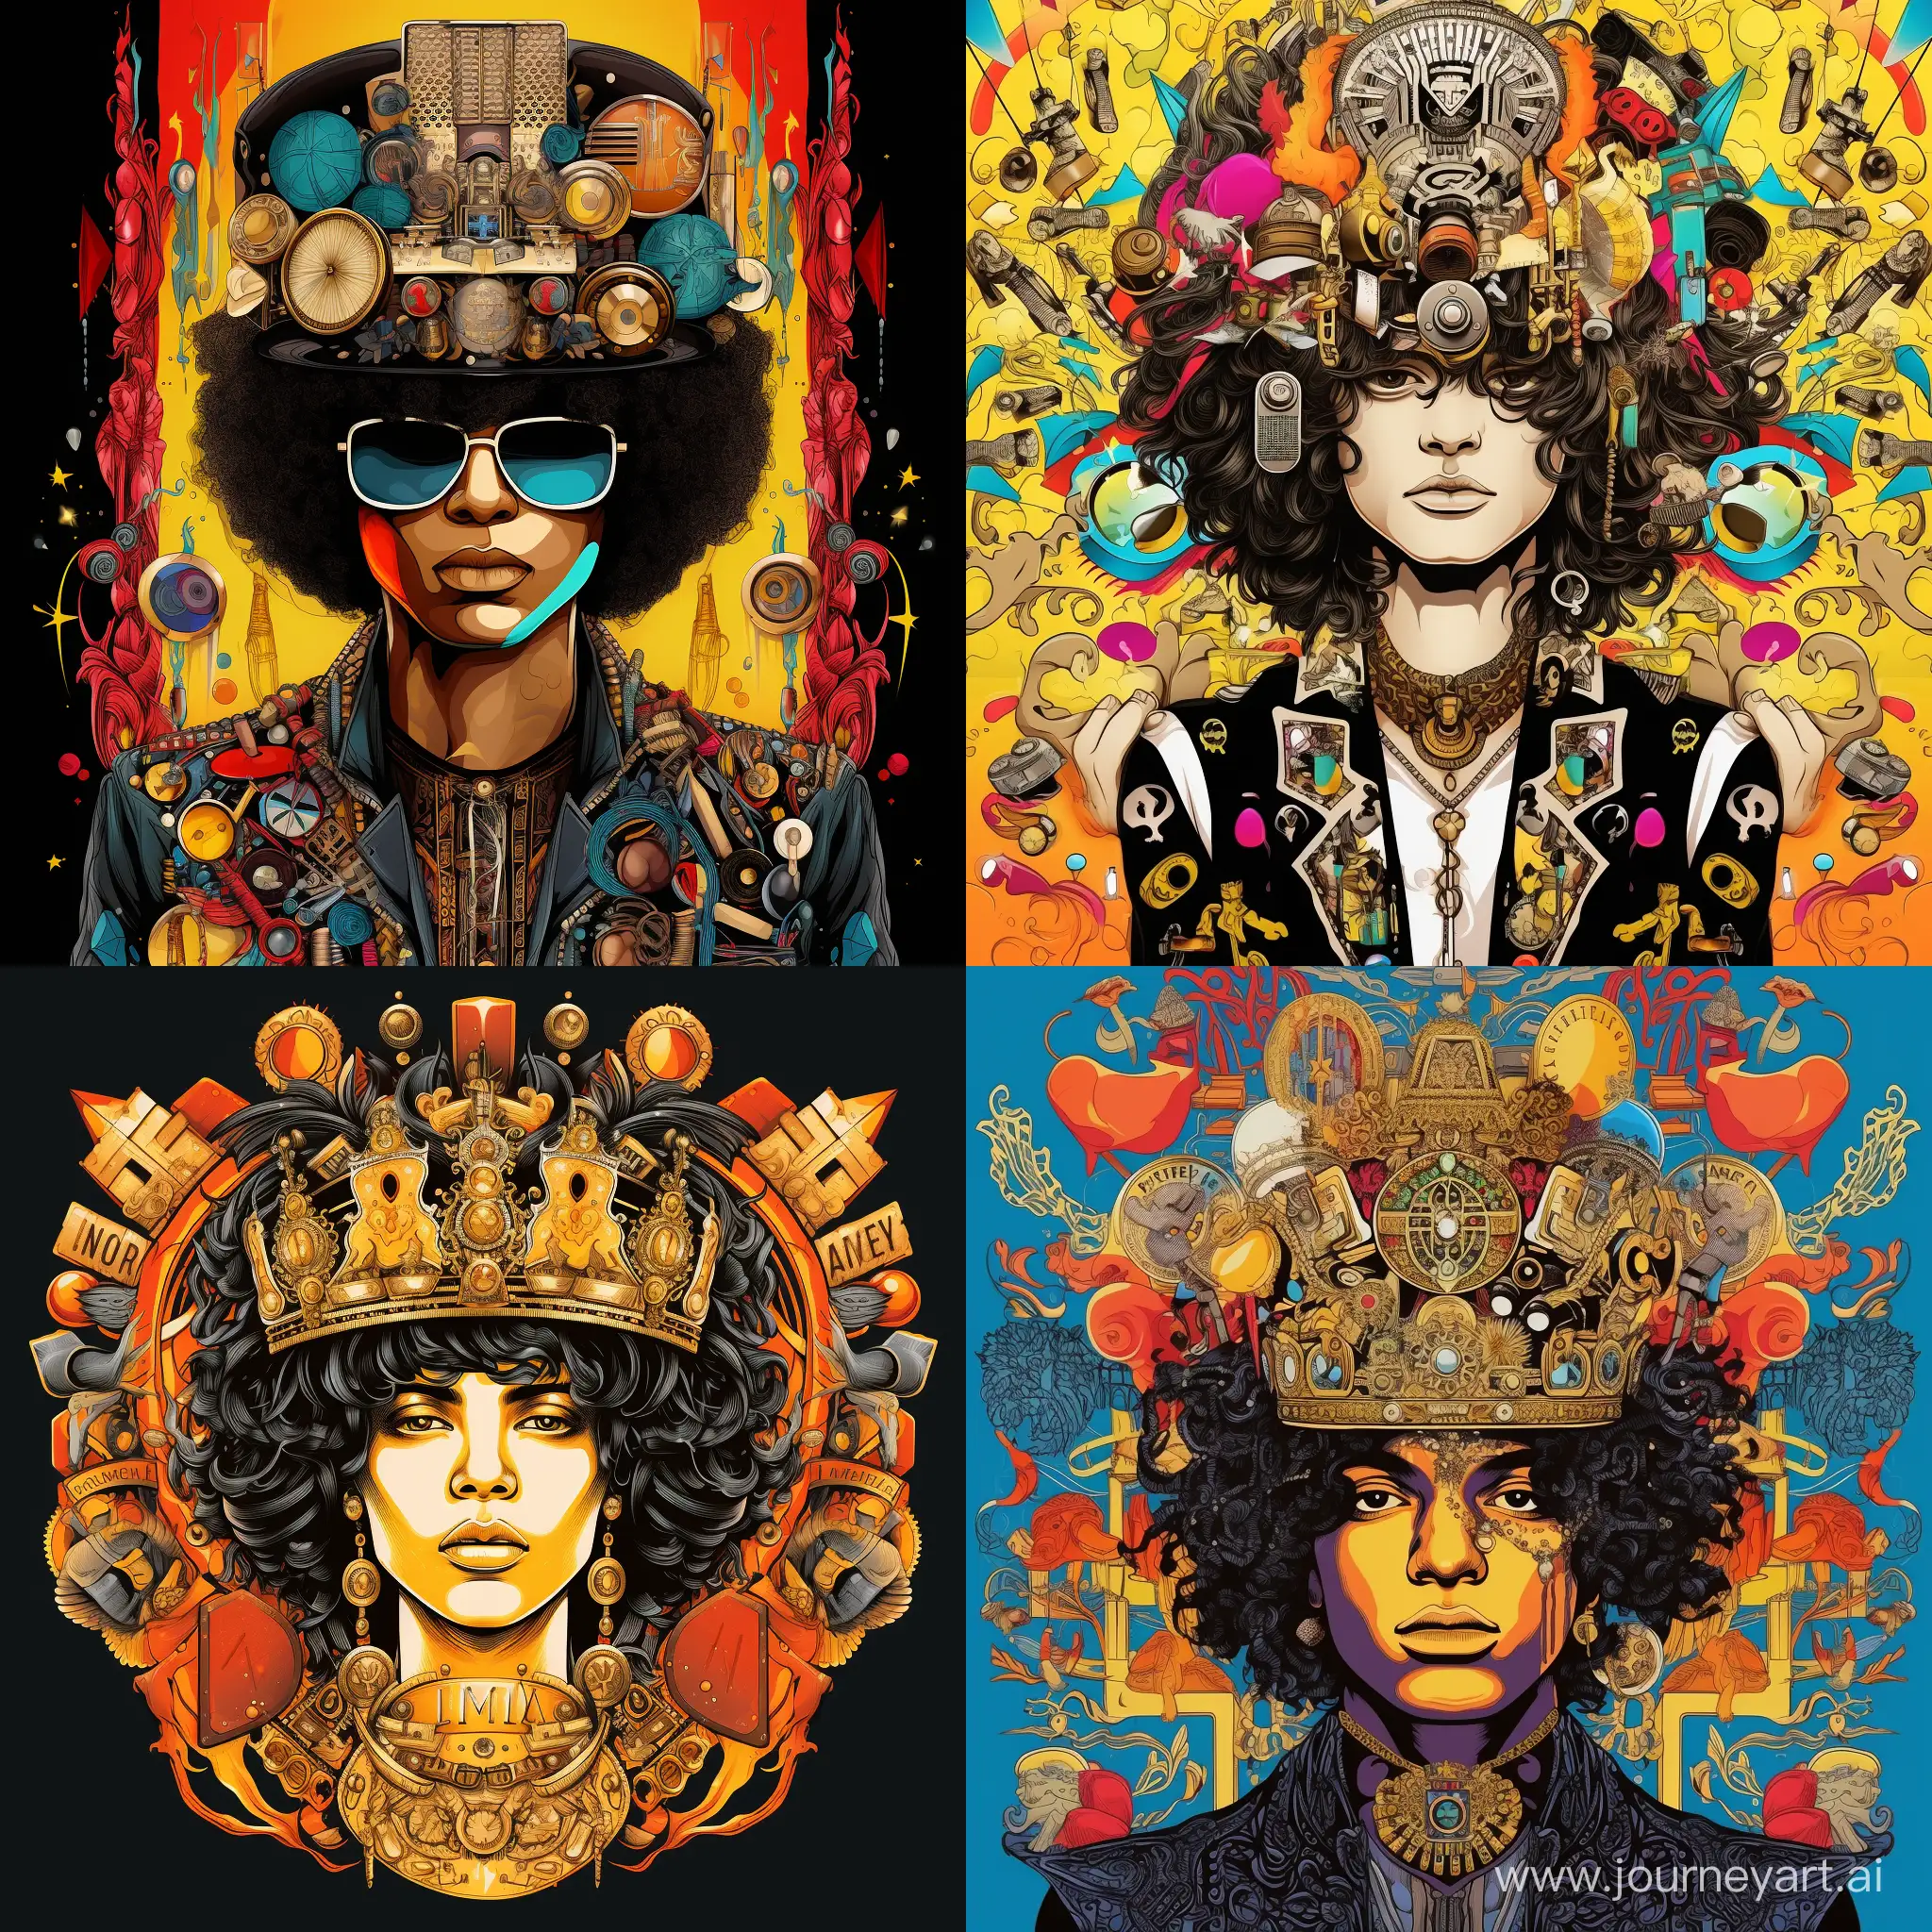 Waist portrait of  Michael Jackson , young, with a crown on his head, surrounded by musical symbols, many details, complex colors, caricature, pop art style